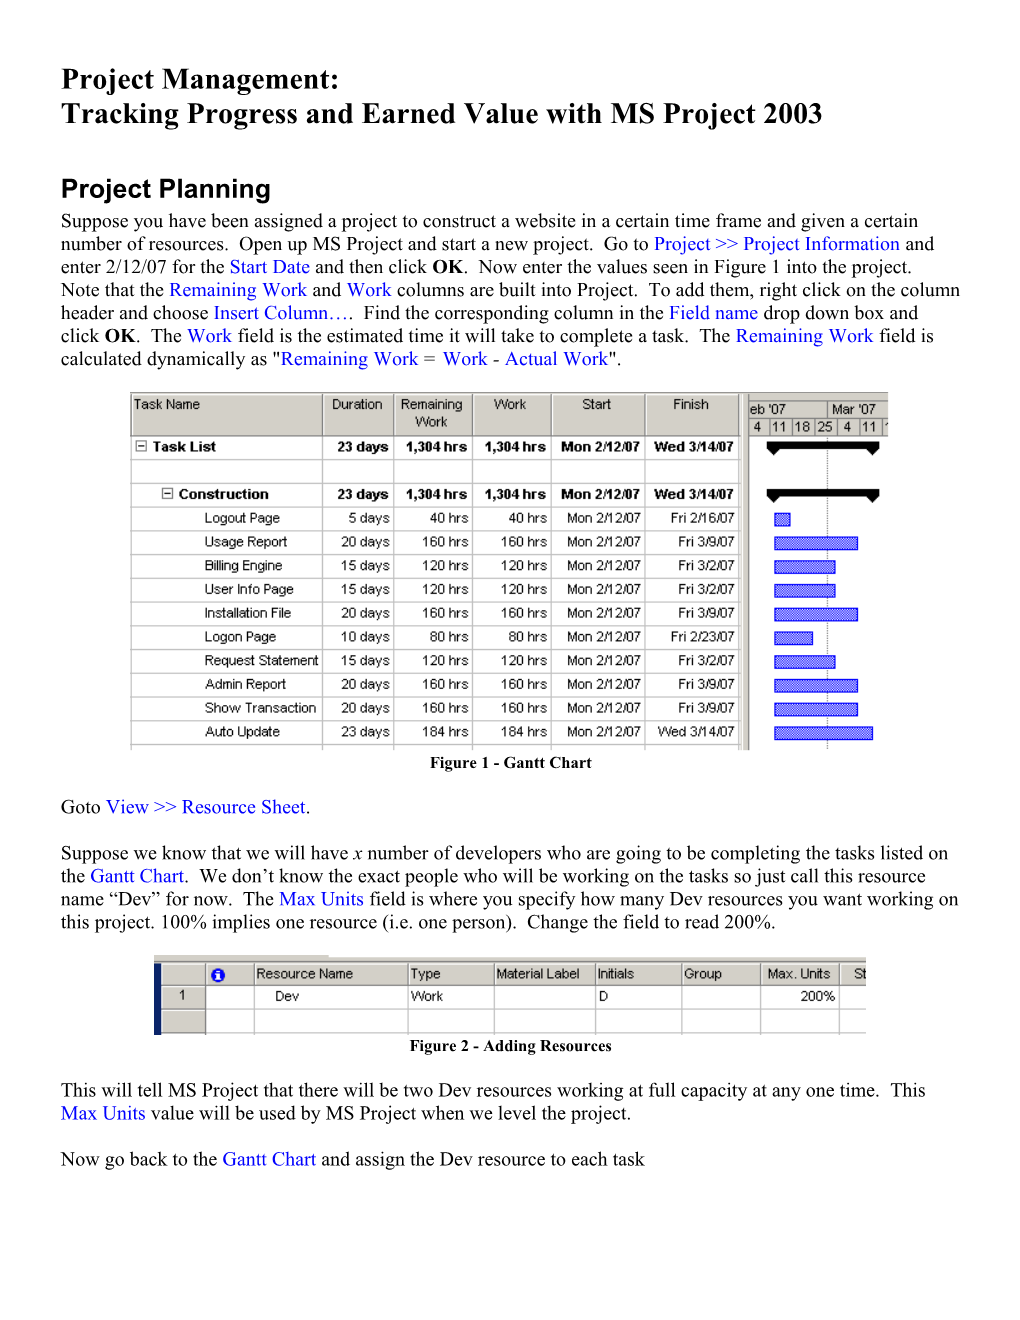 Tracking Progress and Earned Value with MS Project 2003